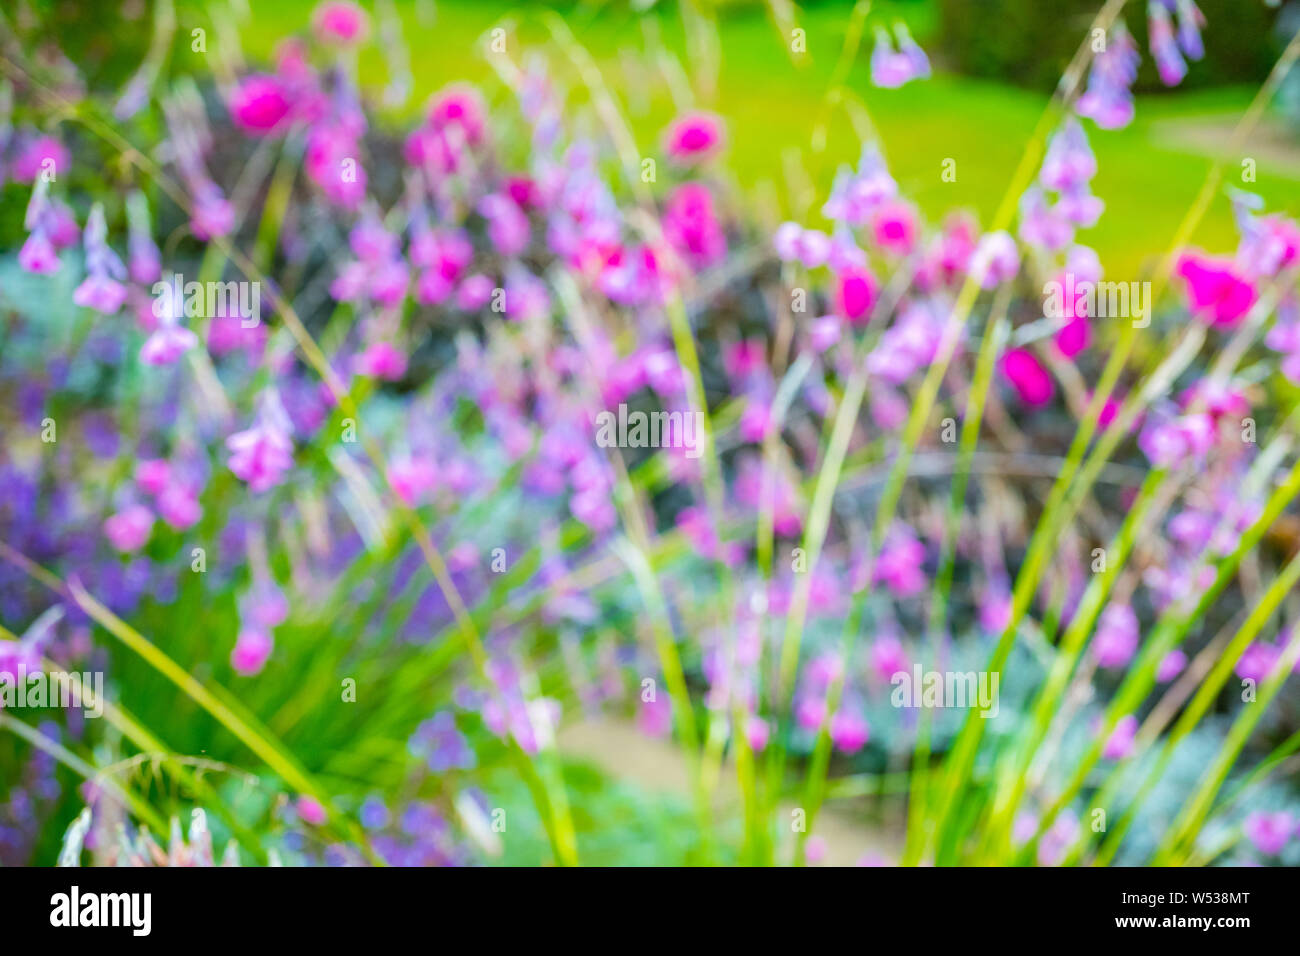 Out of focus images of colourful flowers simular to a Monet Impressionist painting. Stock Photo